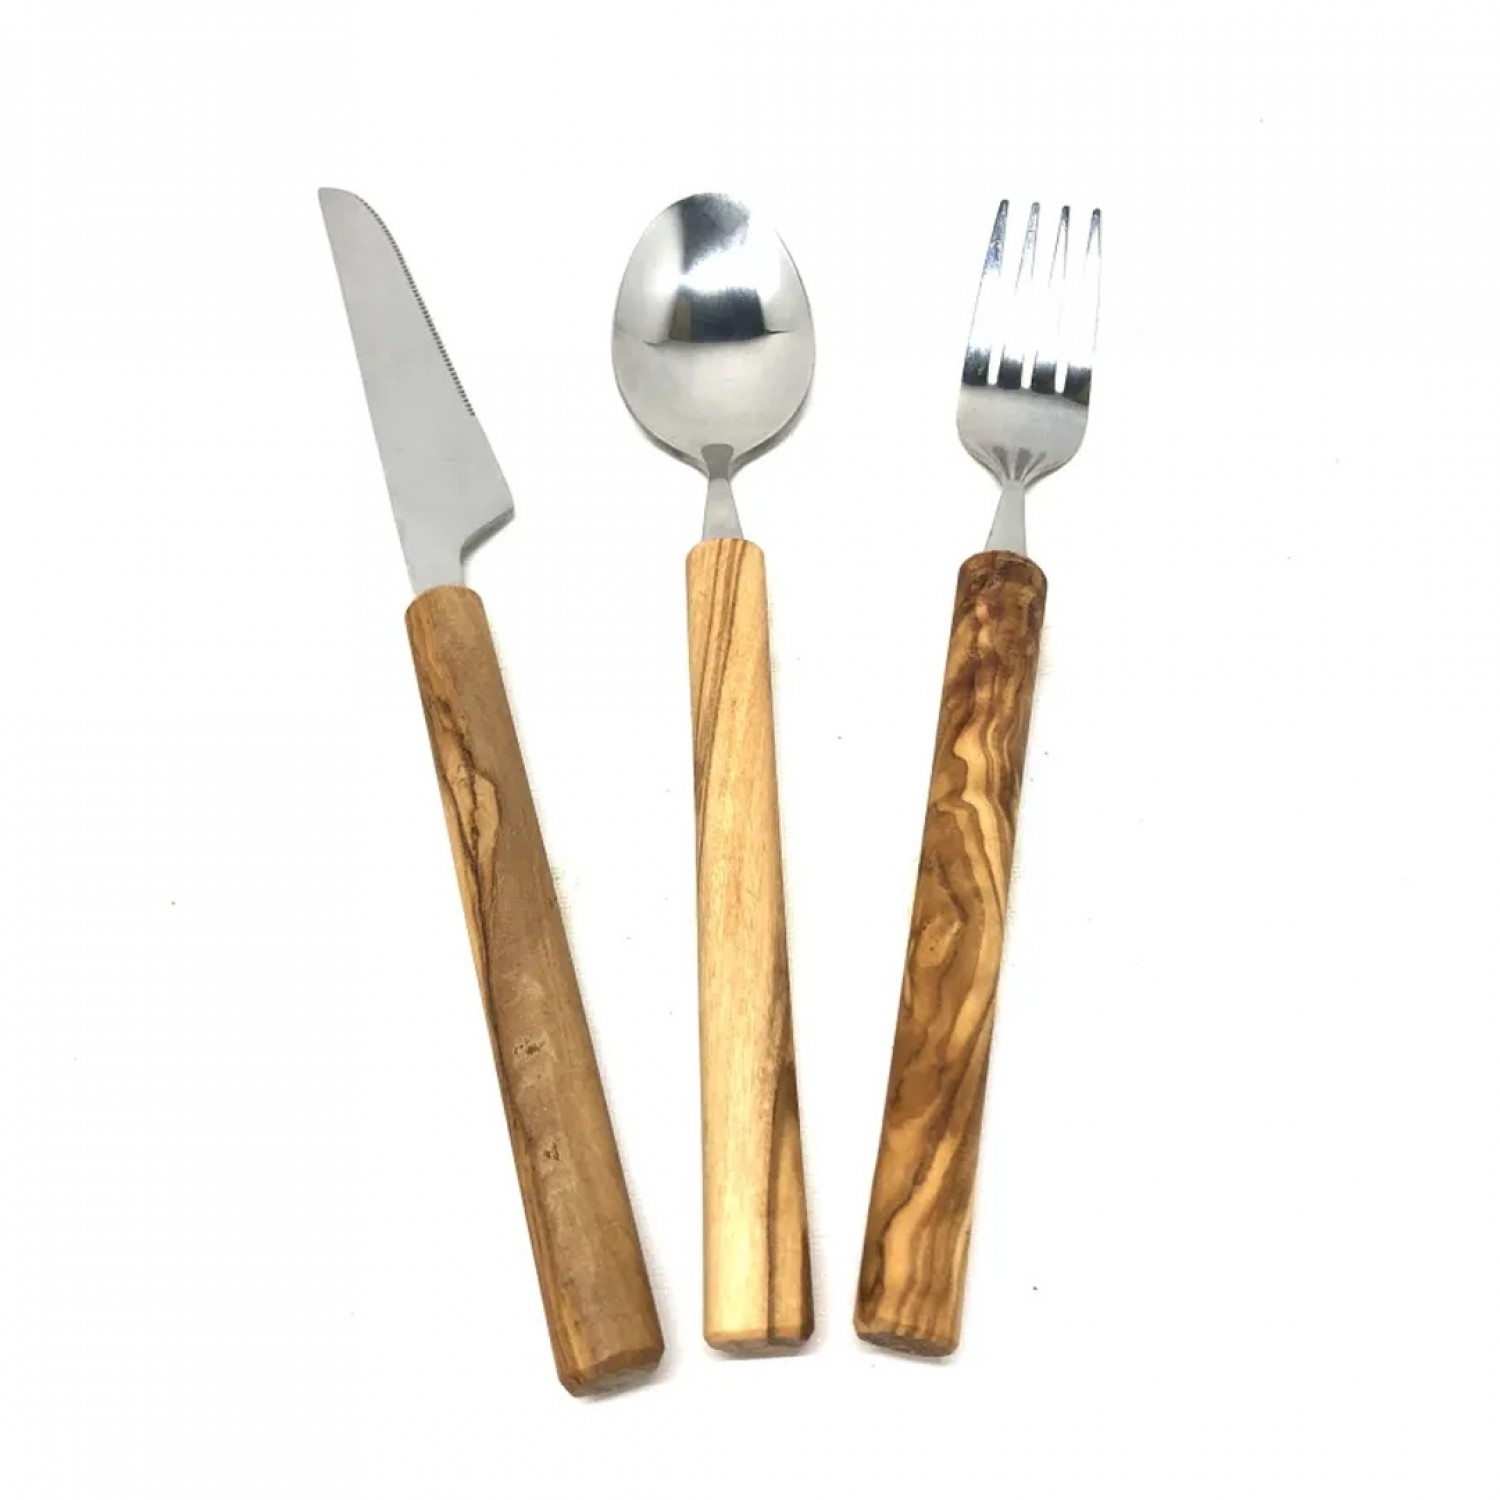 Cutlery Stainless Steel with Olive Wood Handle » Olivenholz erleben